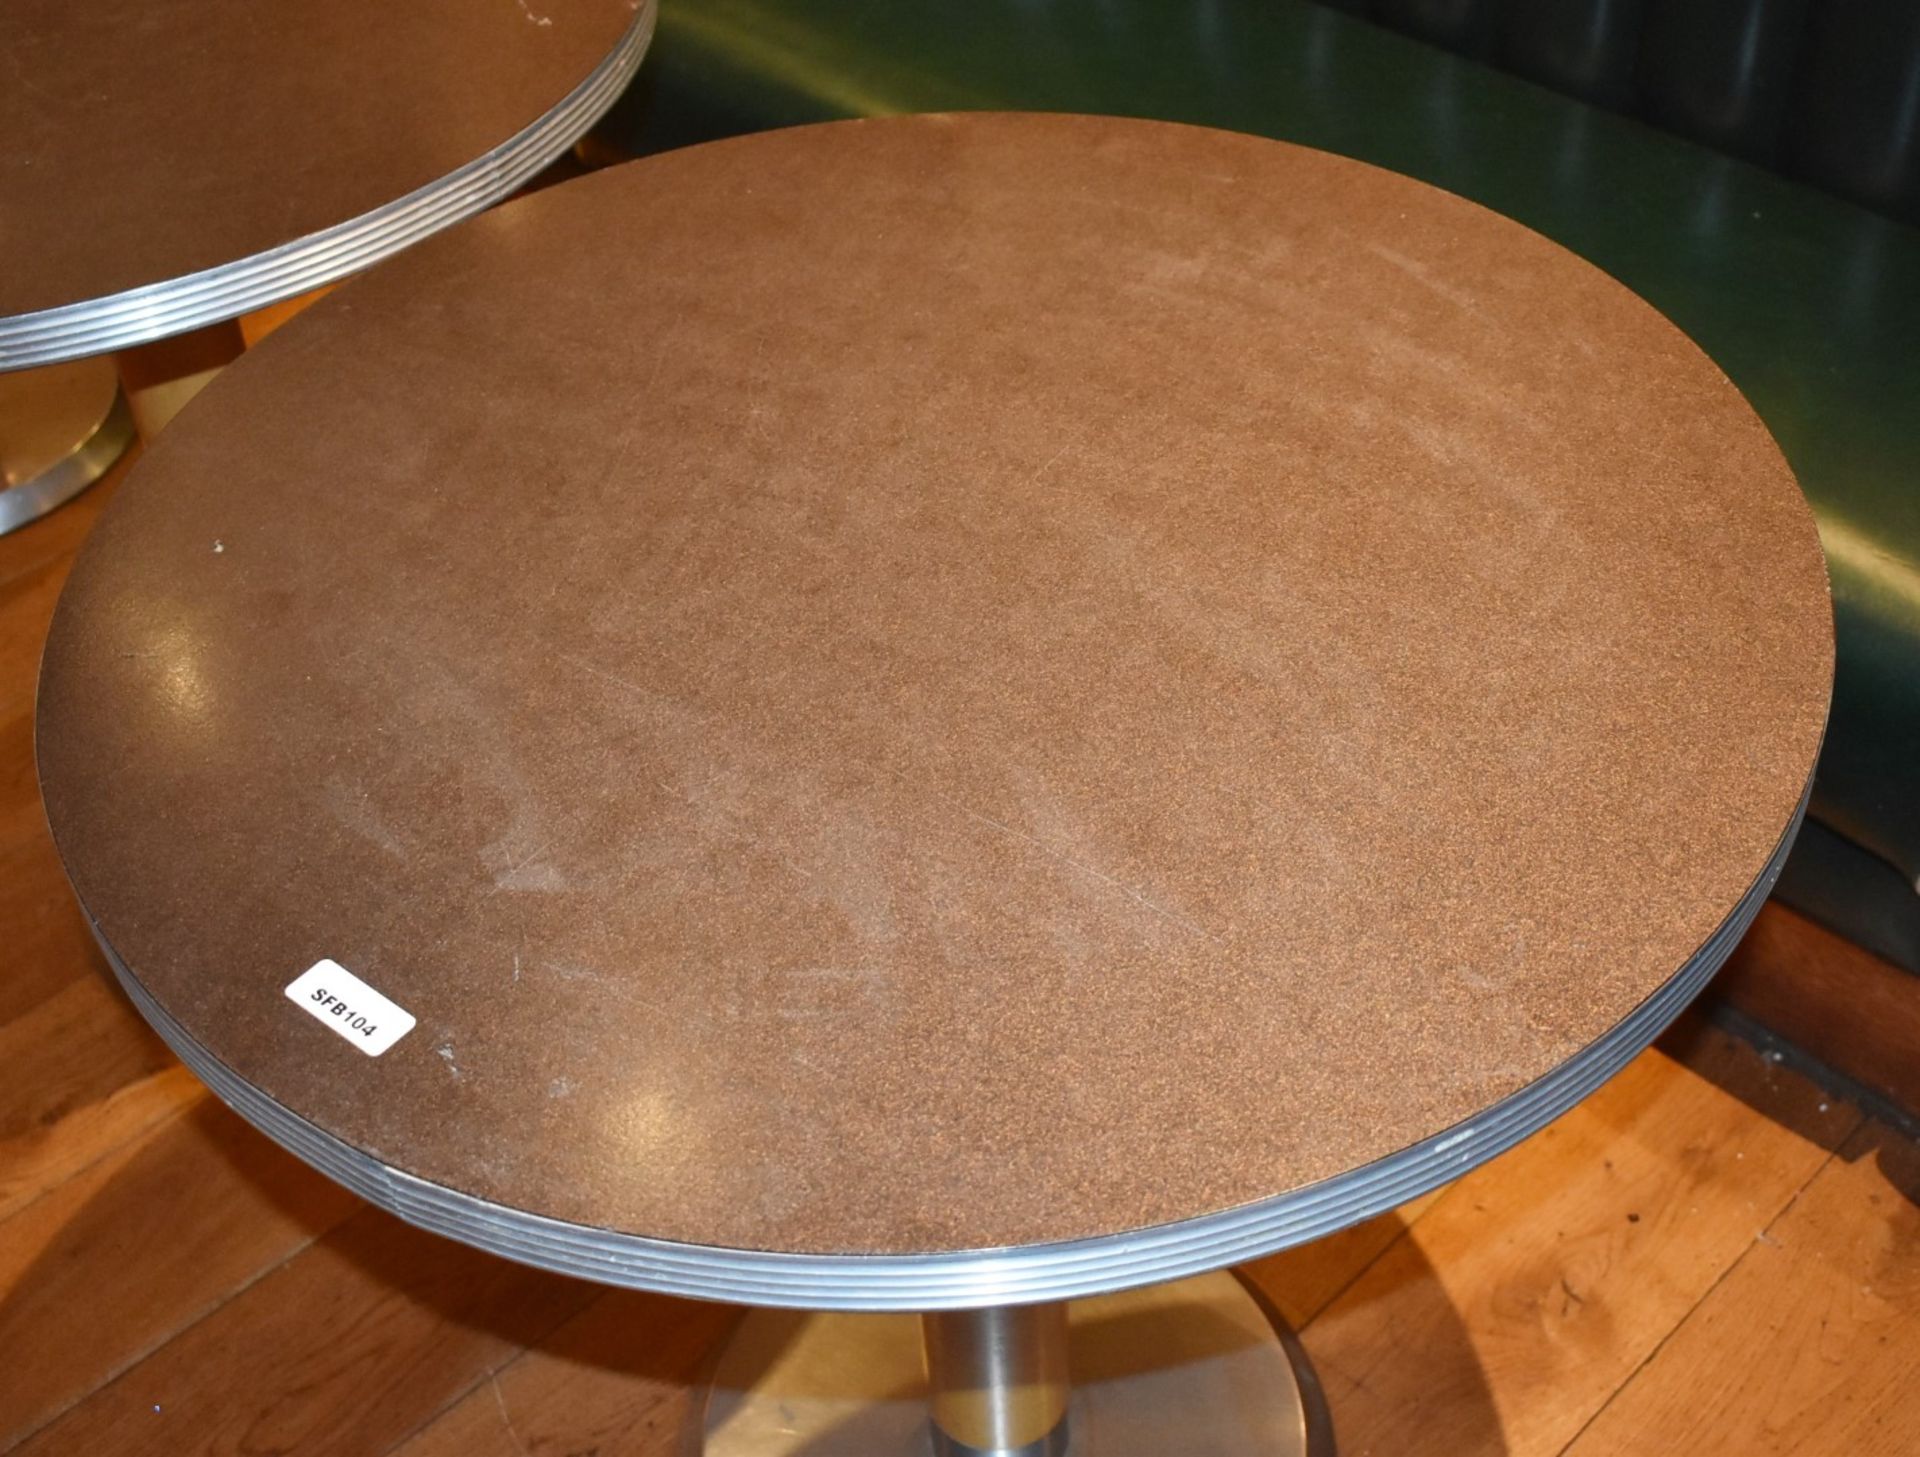 1 x Round Restaurant Dining Table Featuring Brushed Metal Edging and Base - Dimensions: ⌀76 x H76cm - Image 2 of 3